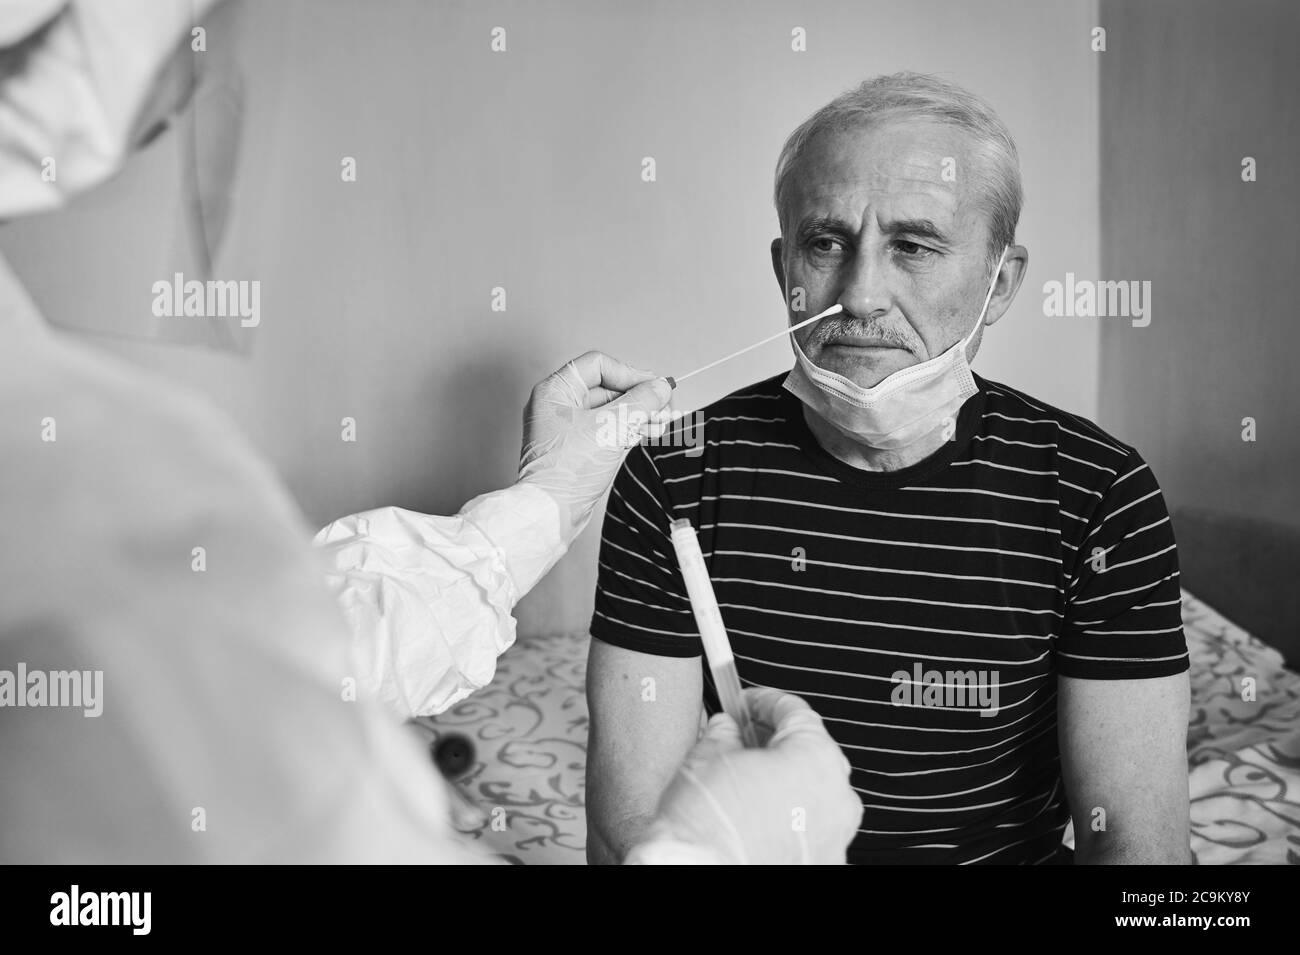 Black and white snapshot of doctor's visit at home. Nurse taking coronavirus test analysis with medical swab to elderly male patient. Test tube for taking OP NP patient specimen sample. Stock Photo